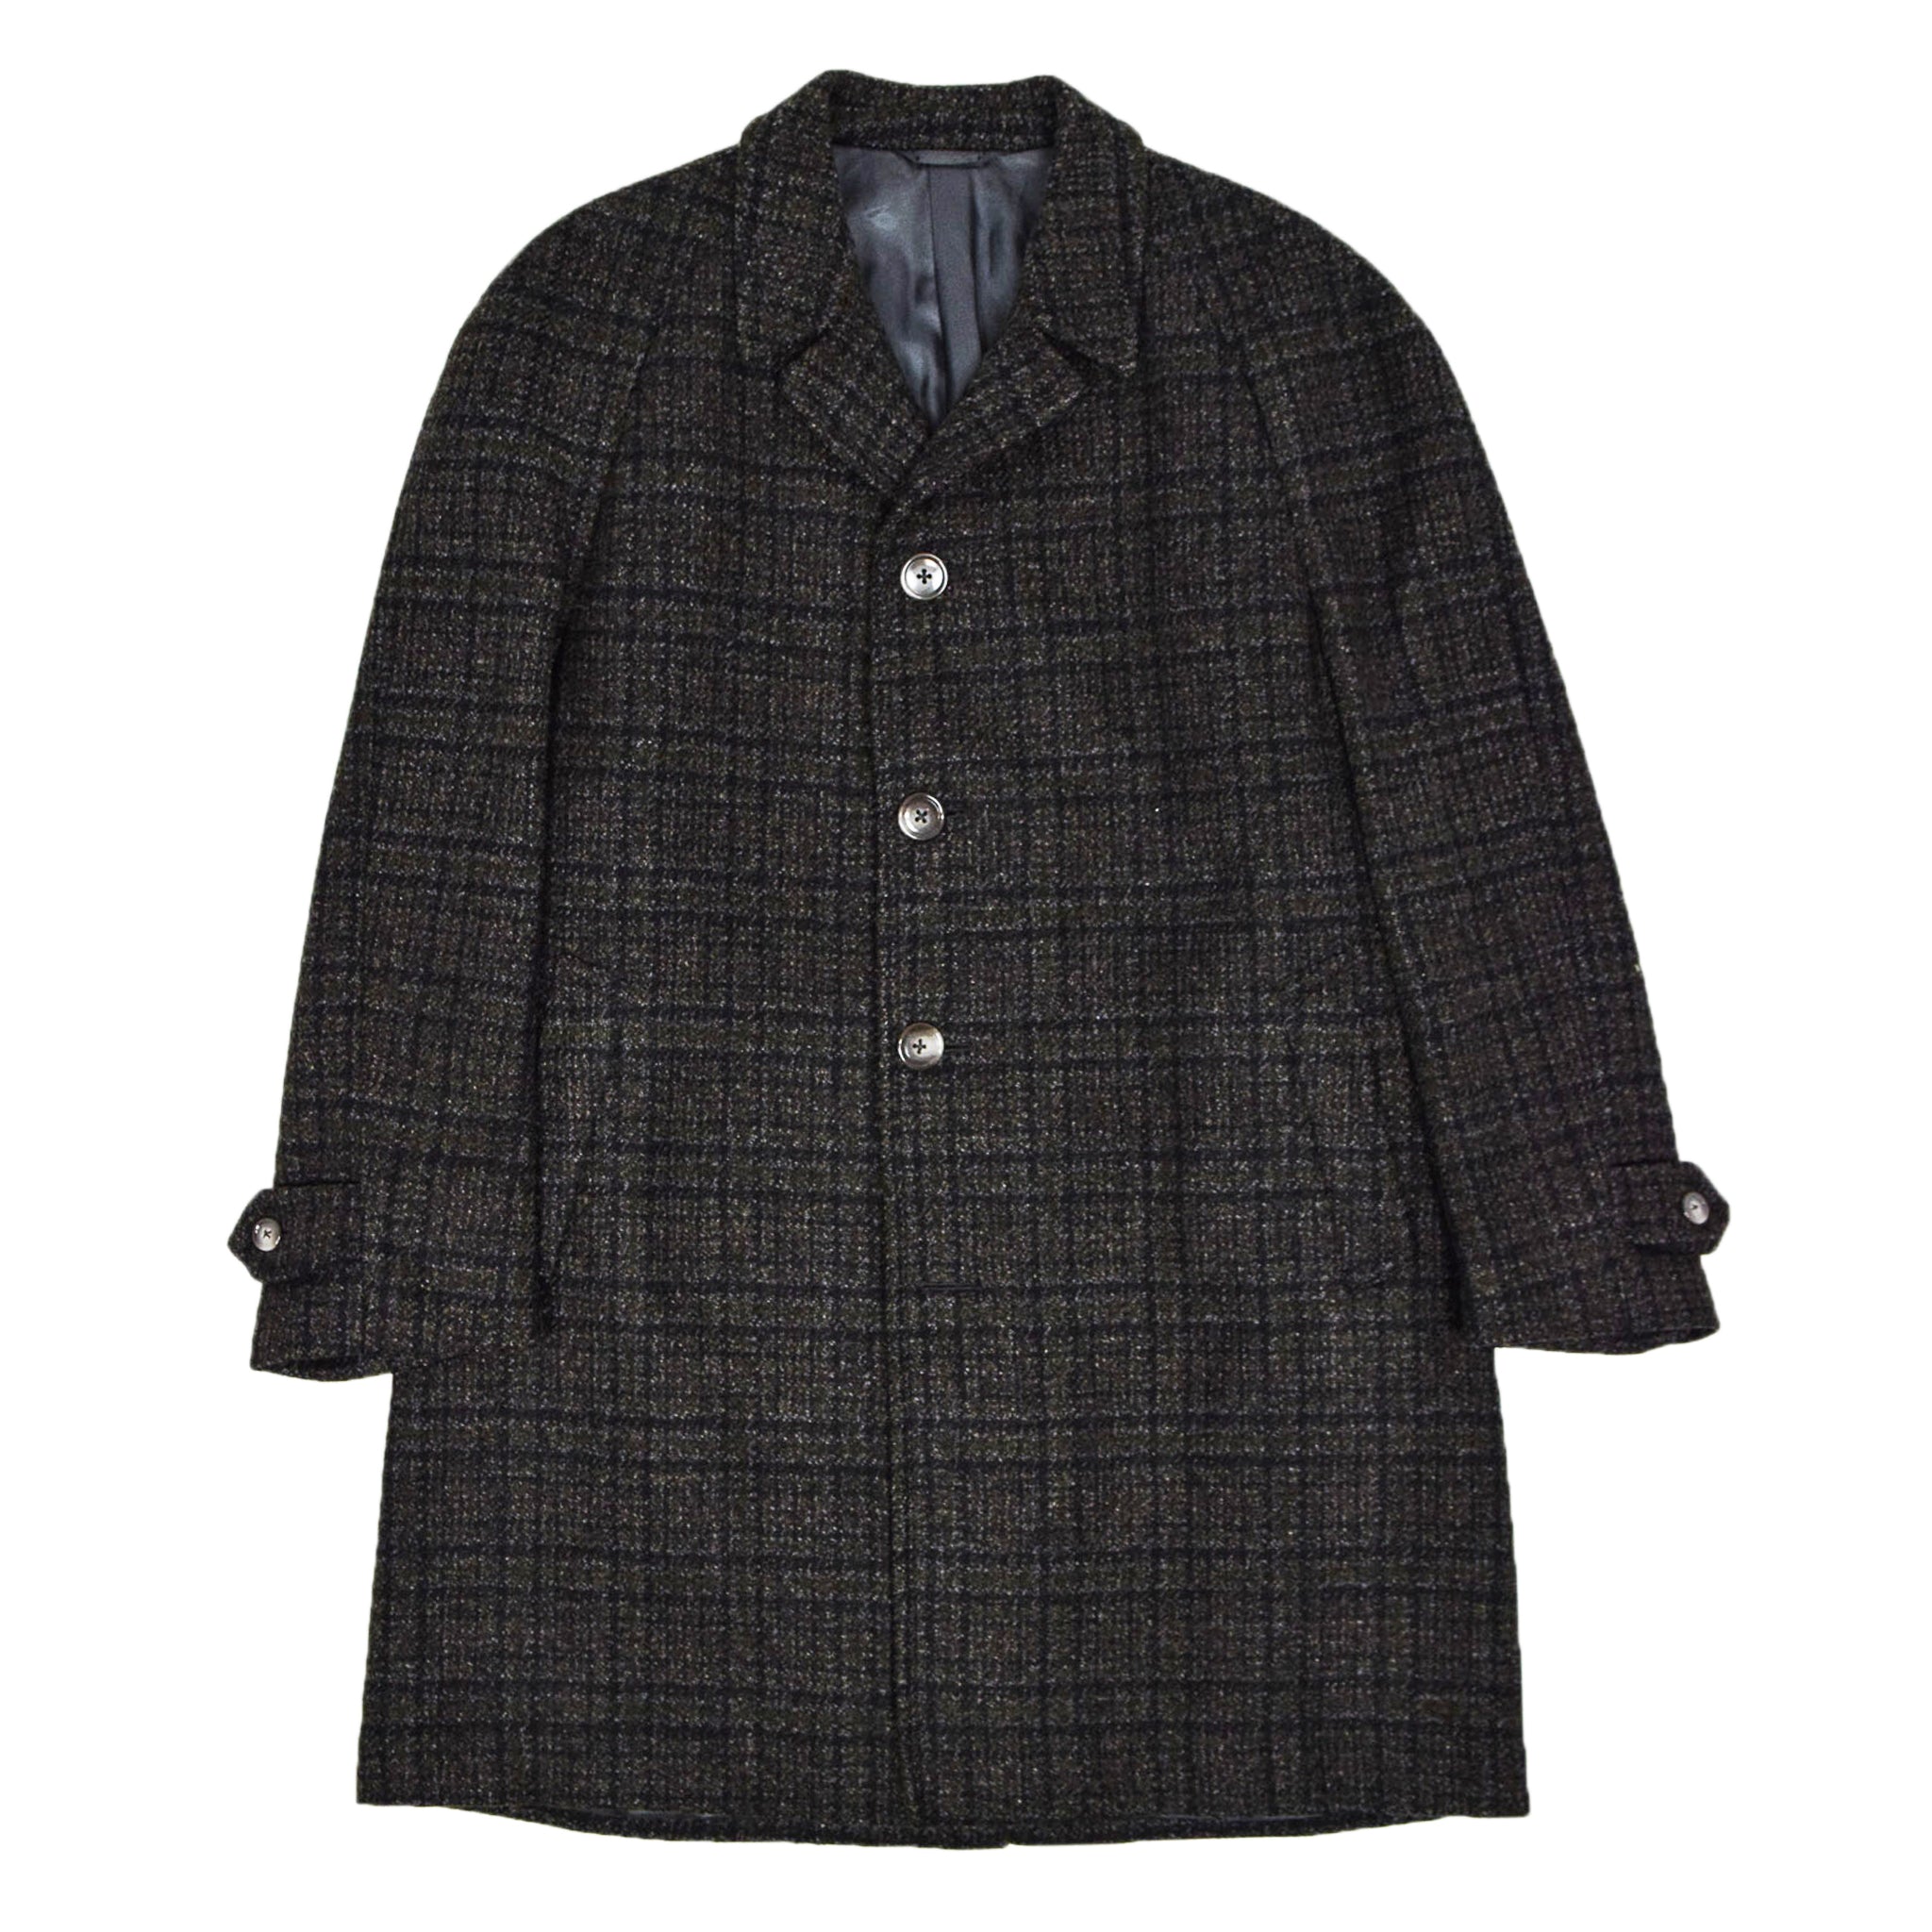 Vintage Dunn & Co Overcoat Black Grey Diffused Check Made in England X ...